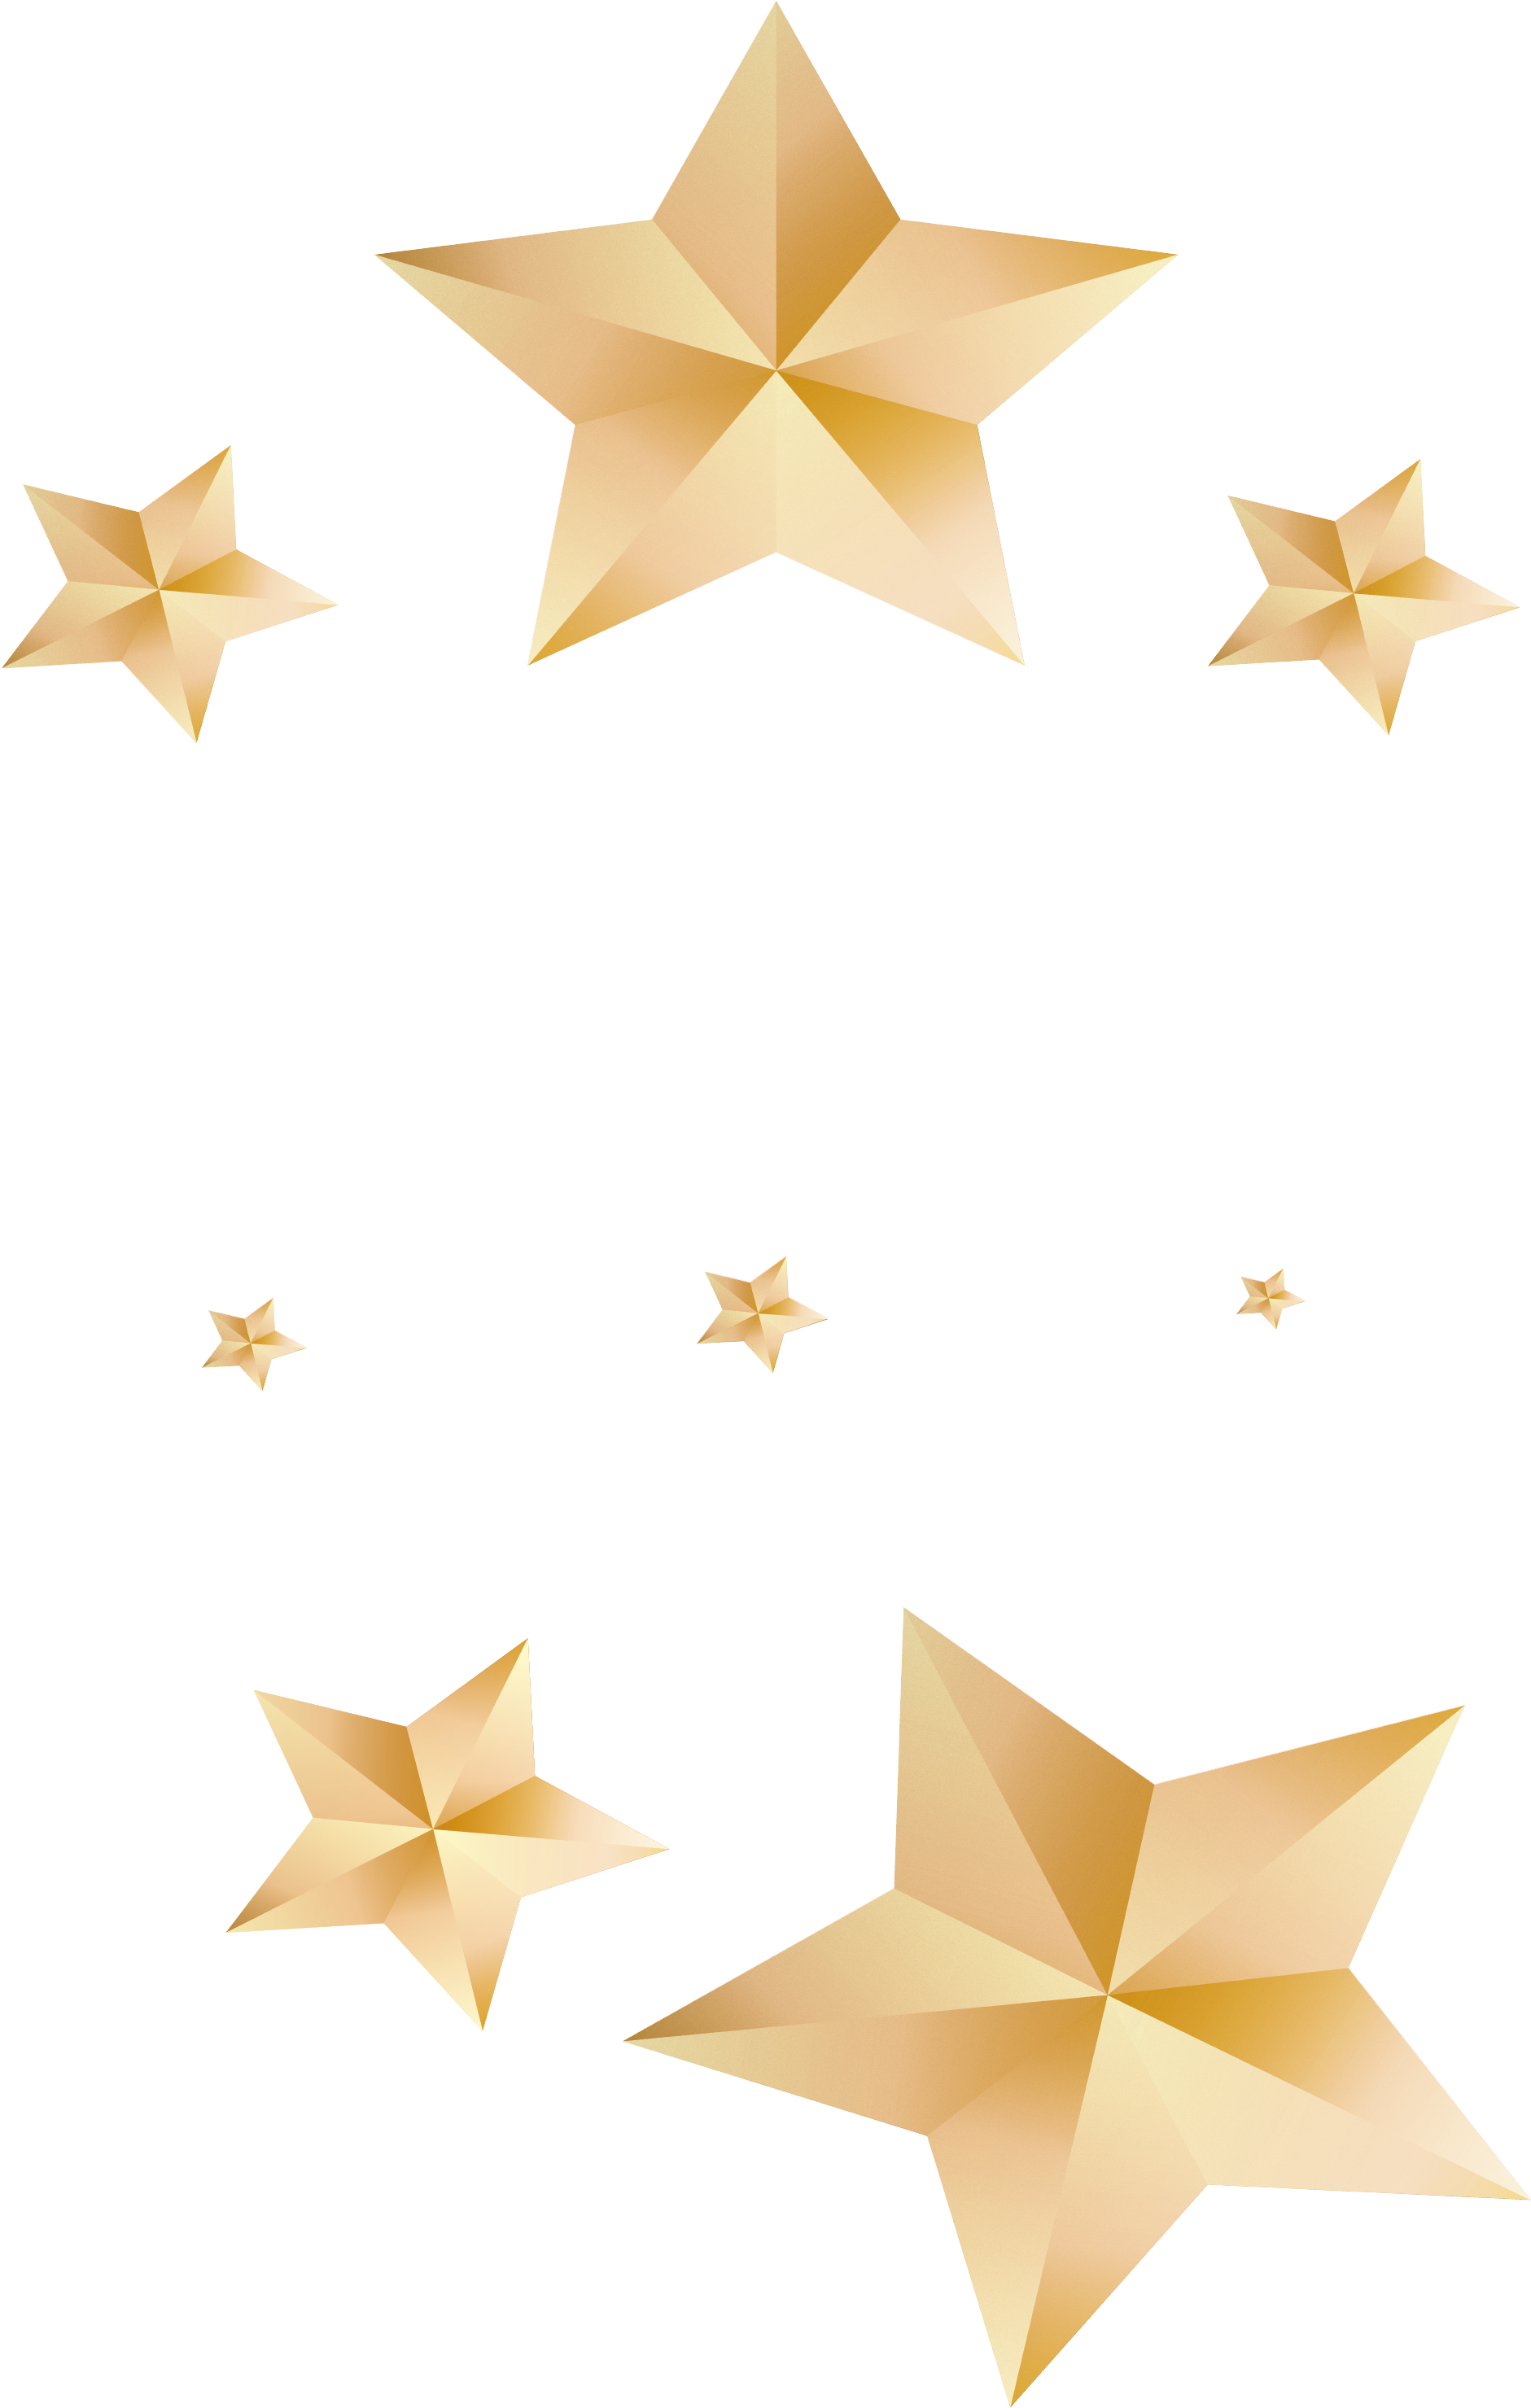 A Group Of Gold Stars On A Black Background